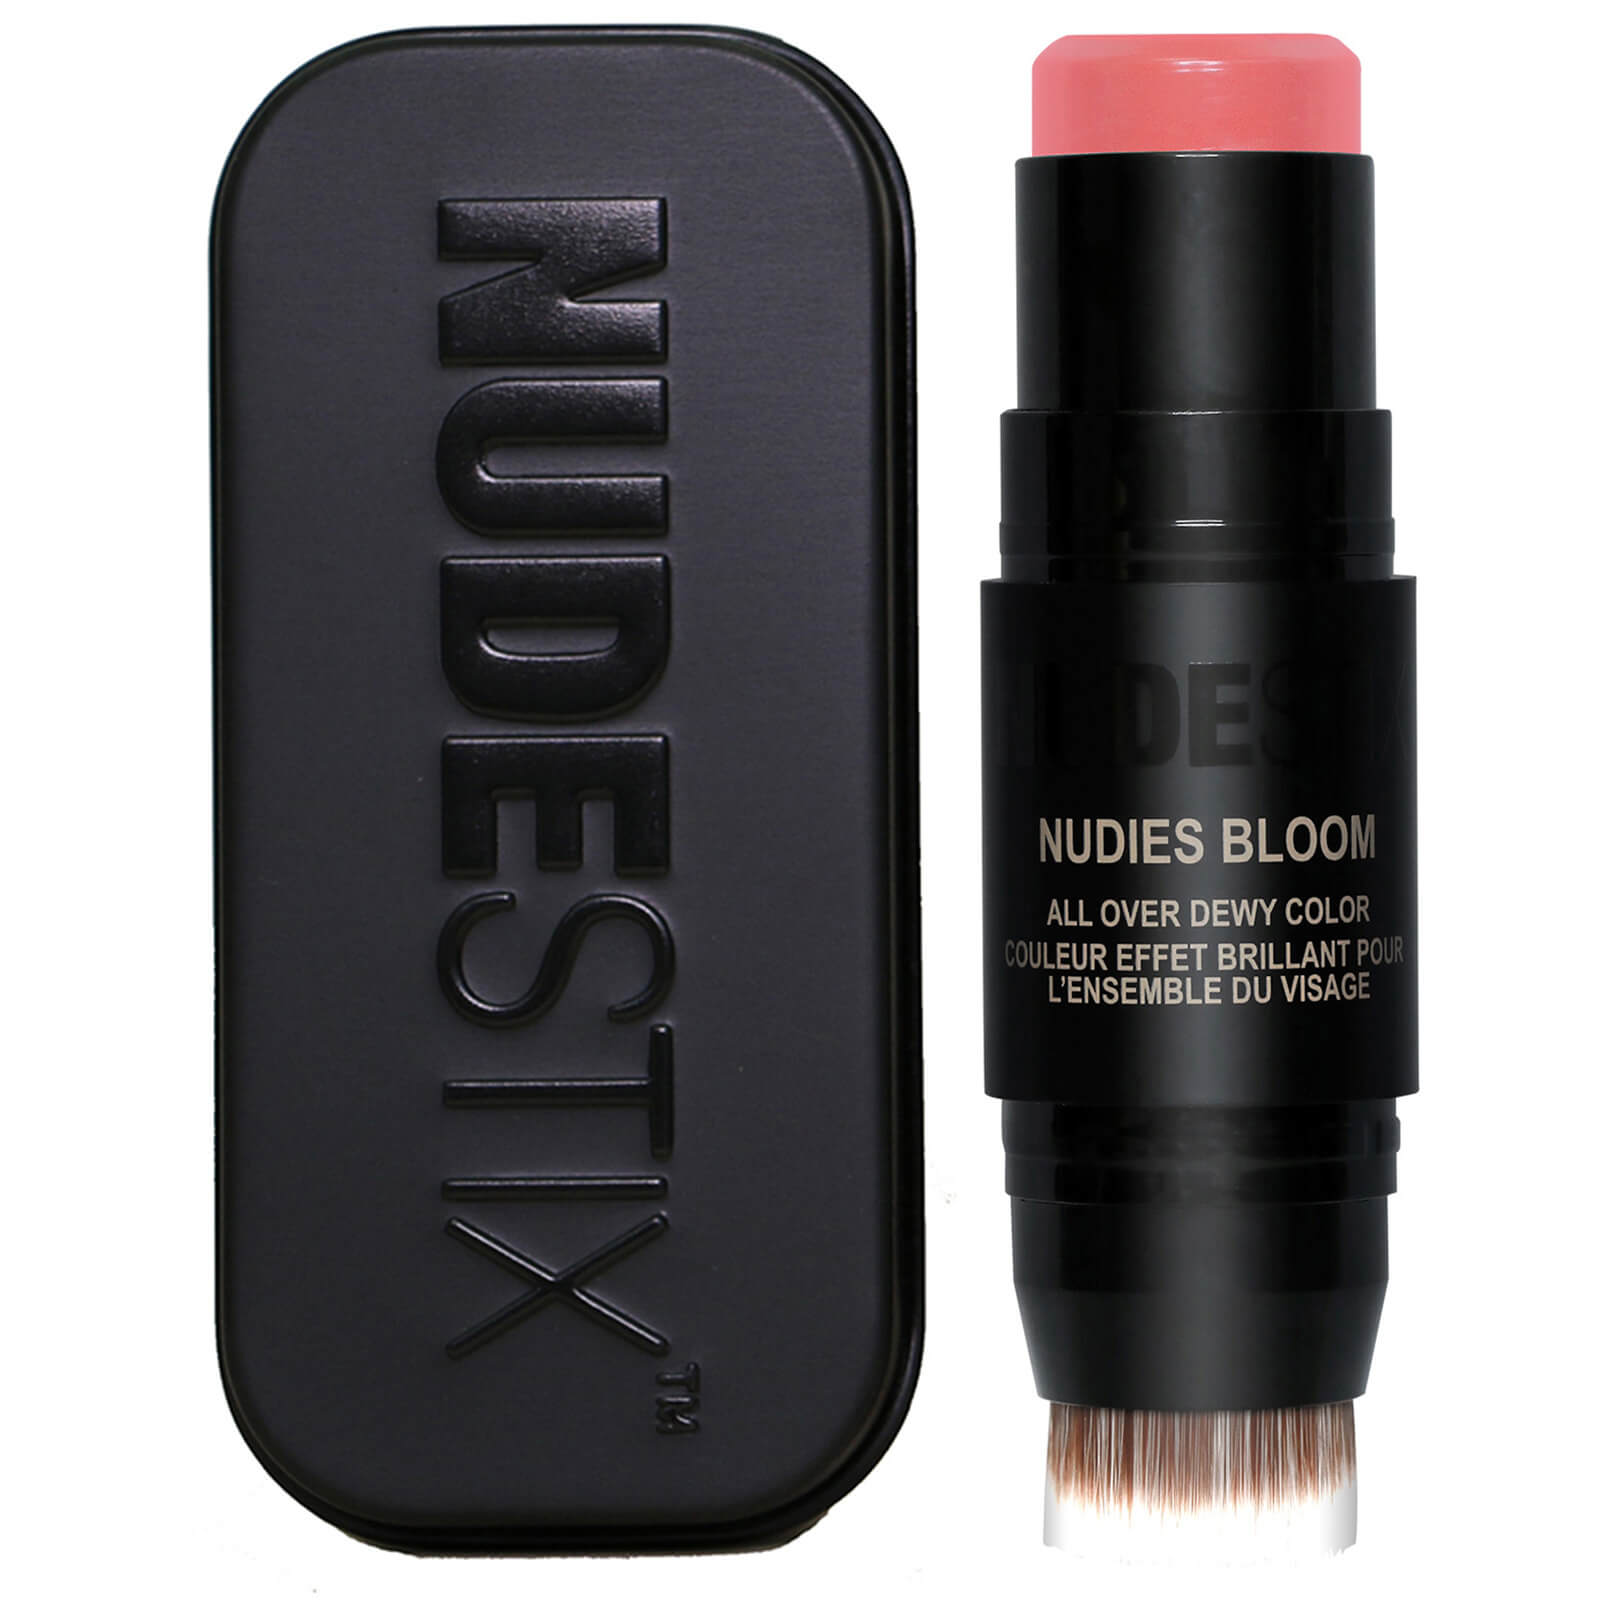 nudestix nudies bloom 7g (various shades) - cherry blossom babe